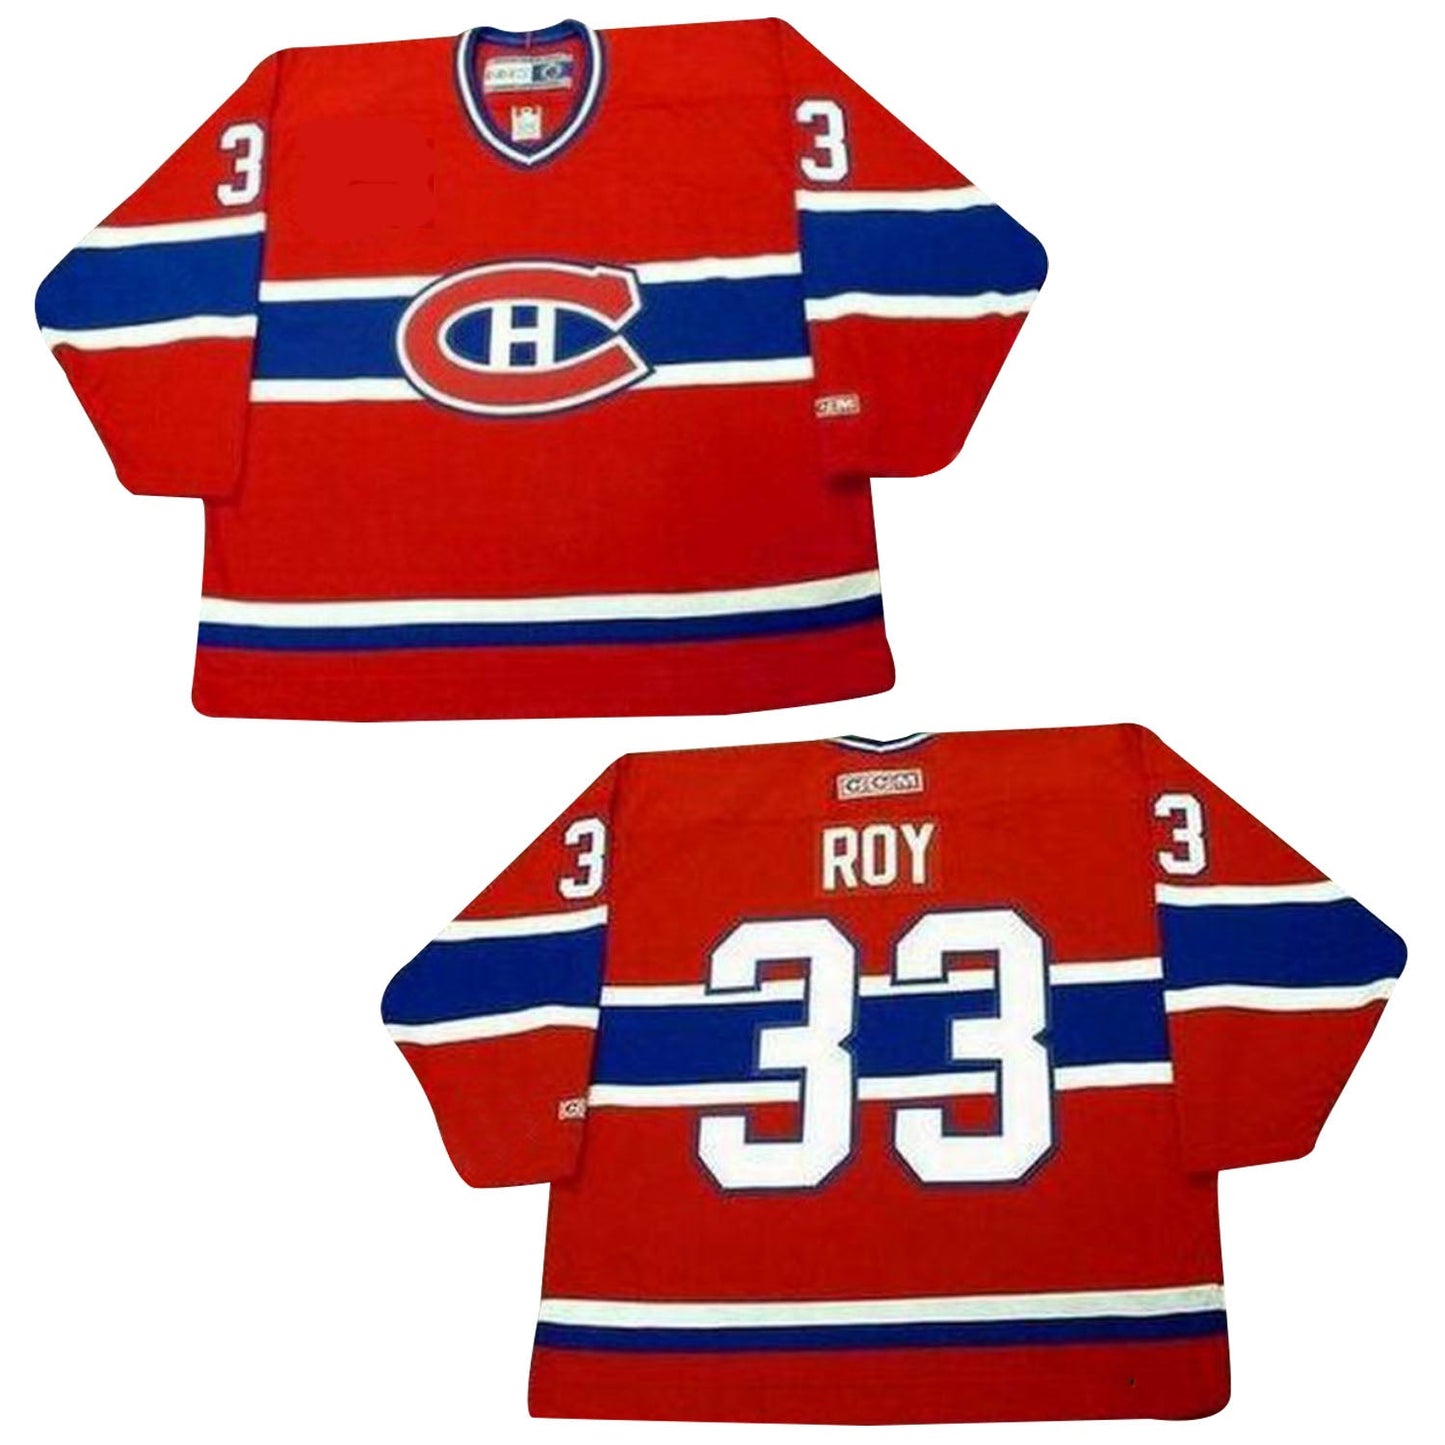 NHL Patrick Roy Montreal Canadians 33 Jersey